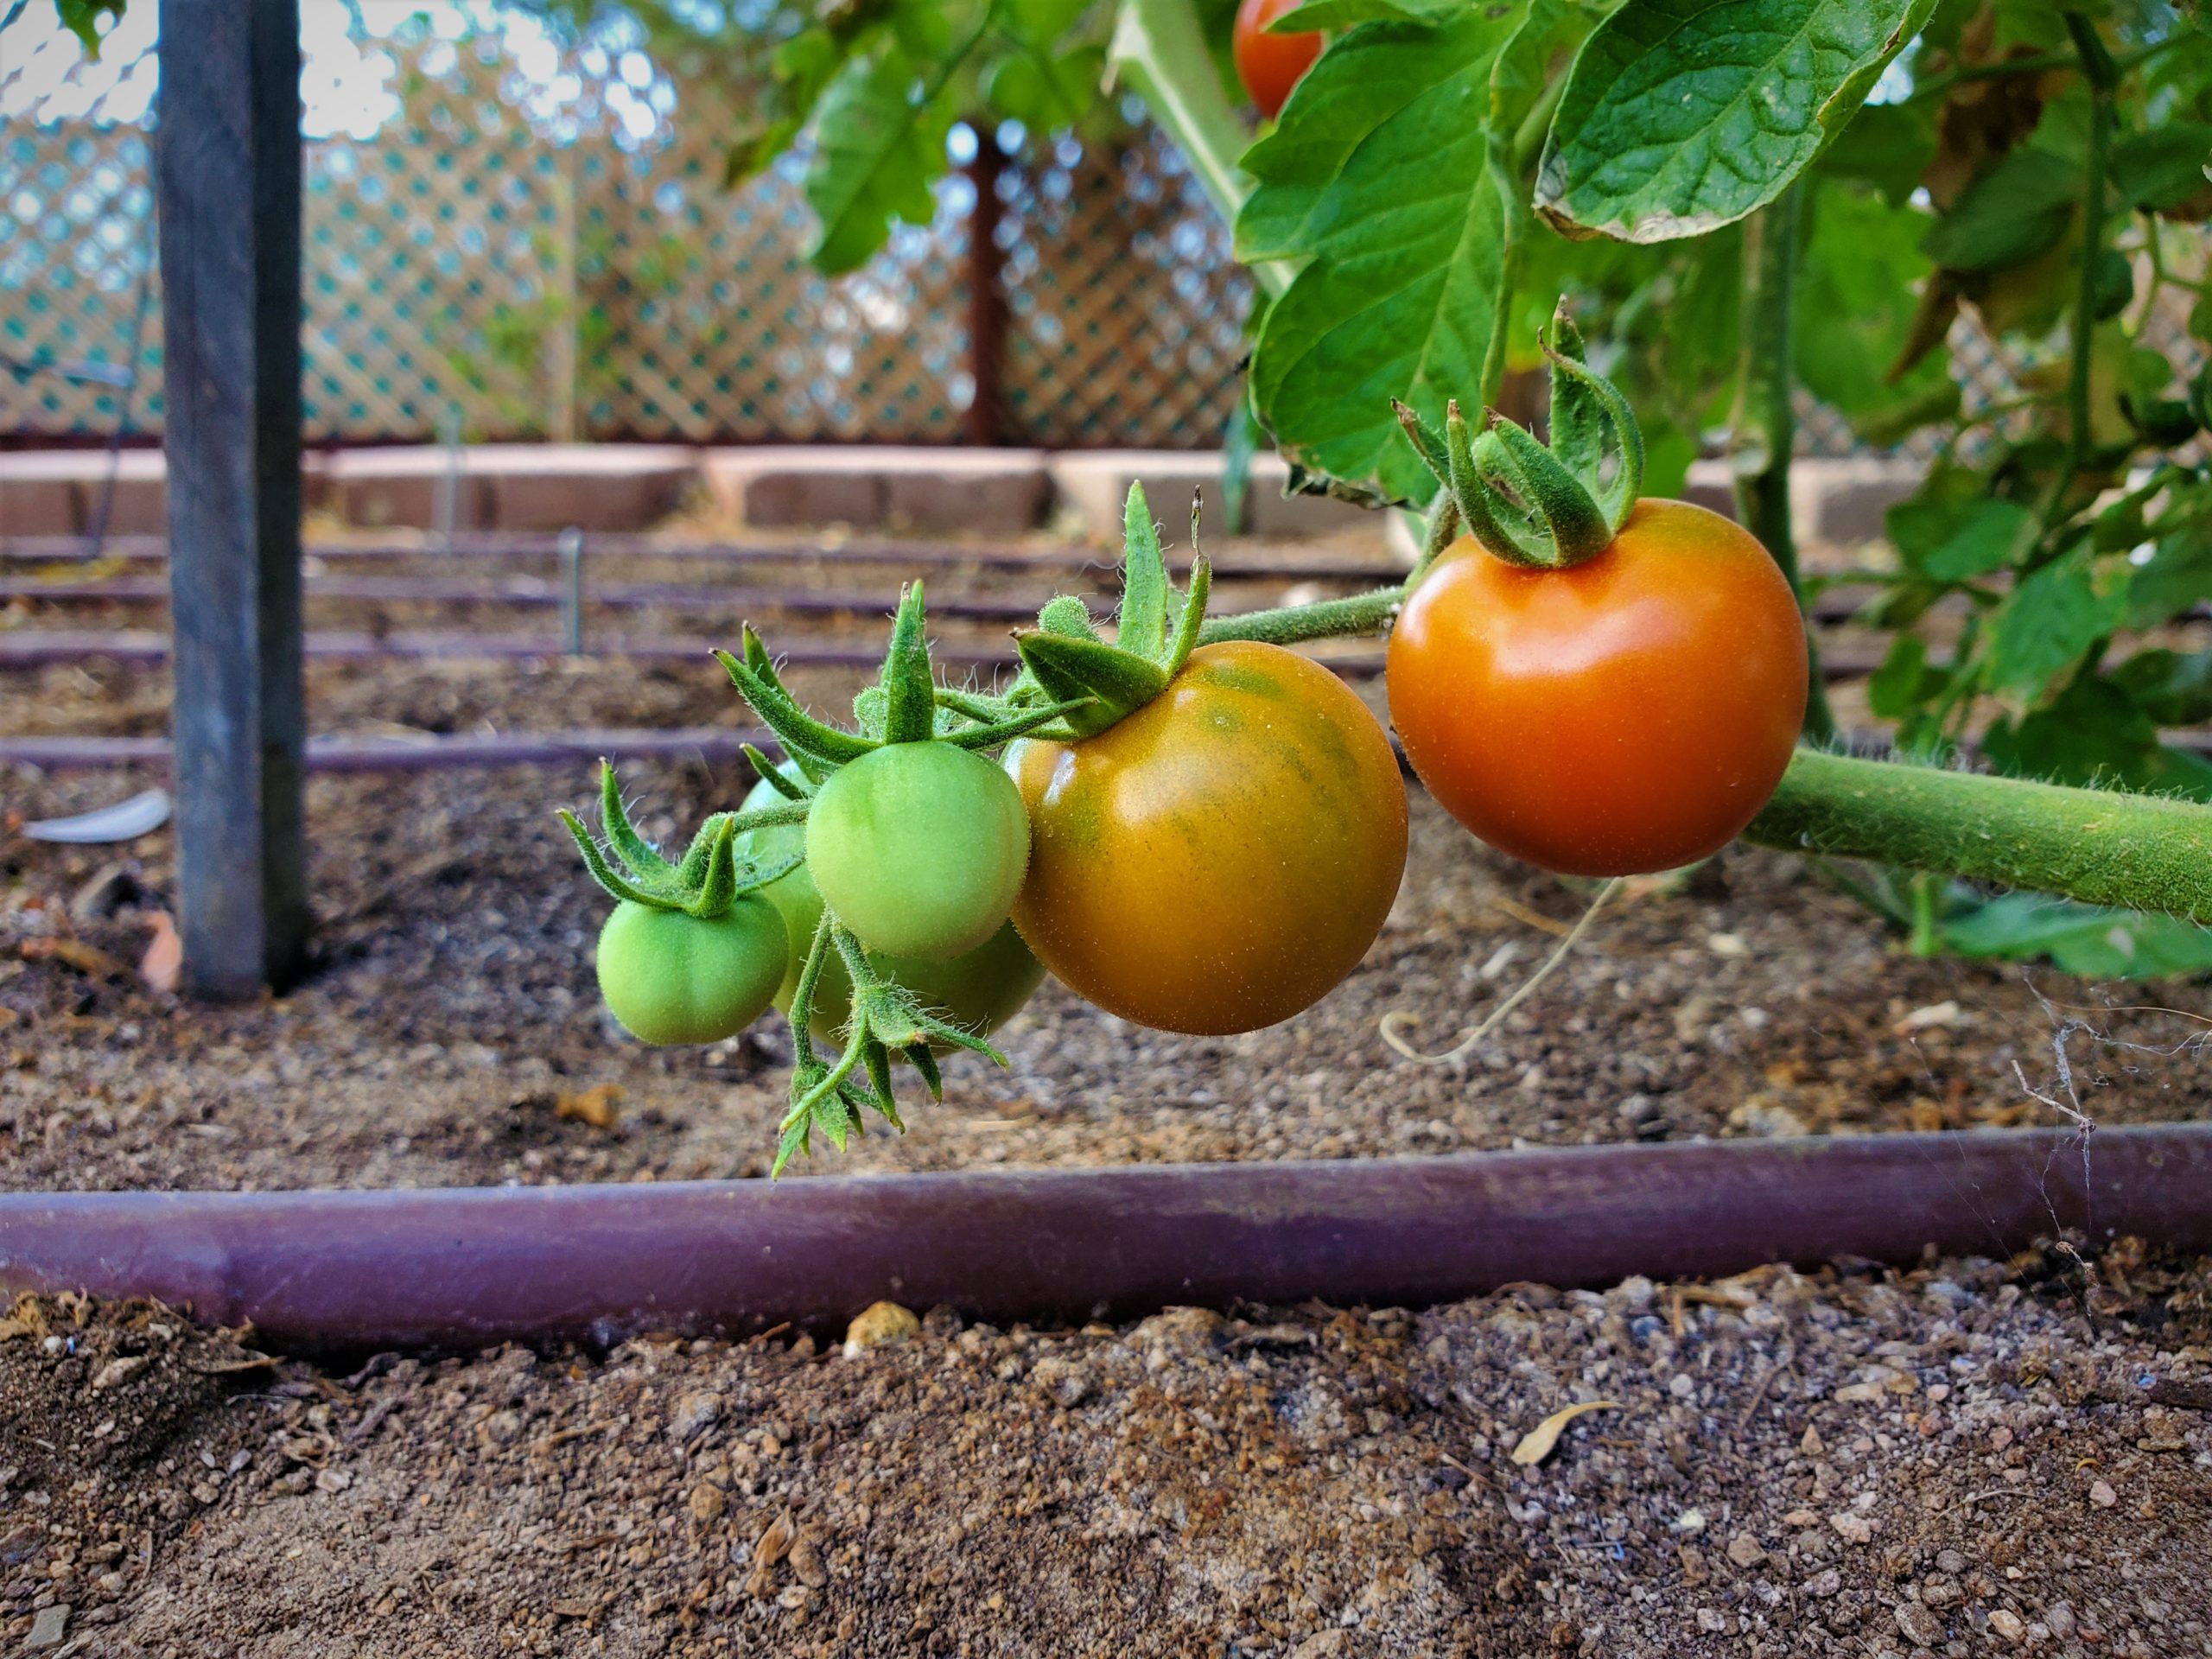 Ripening tomatoes on the vine